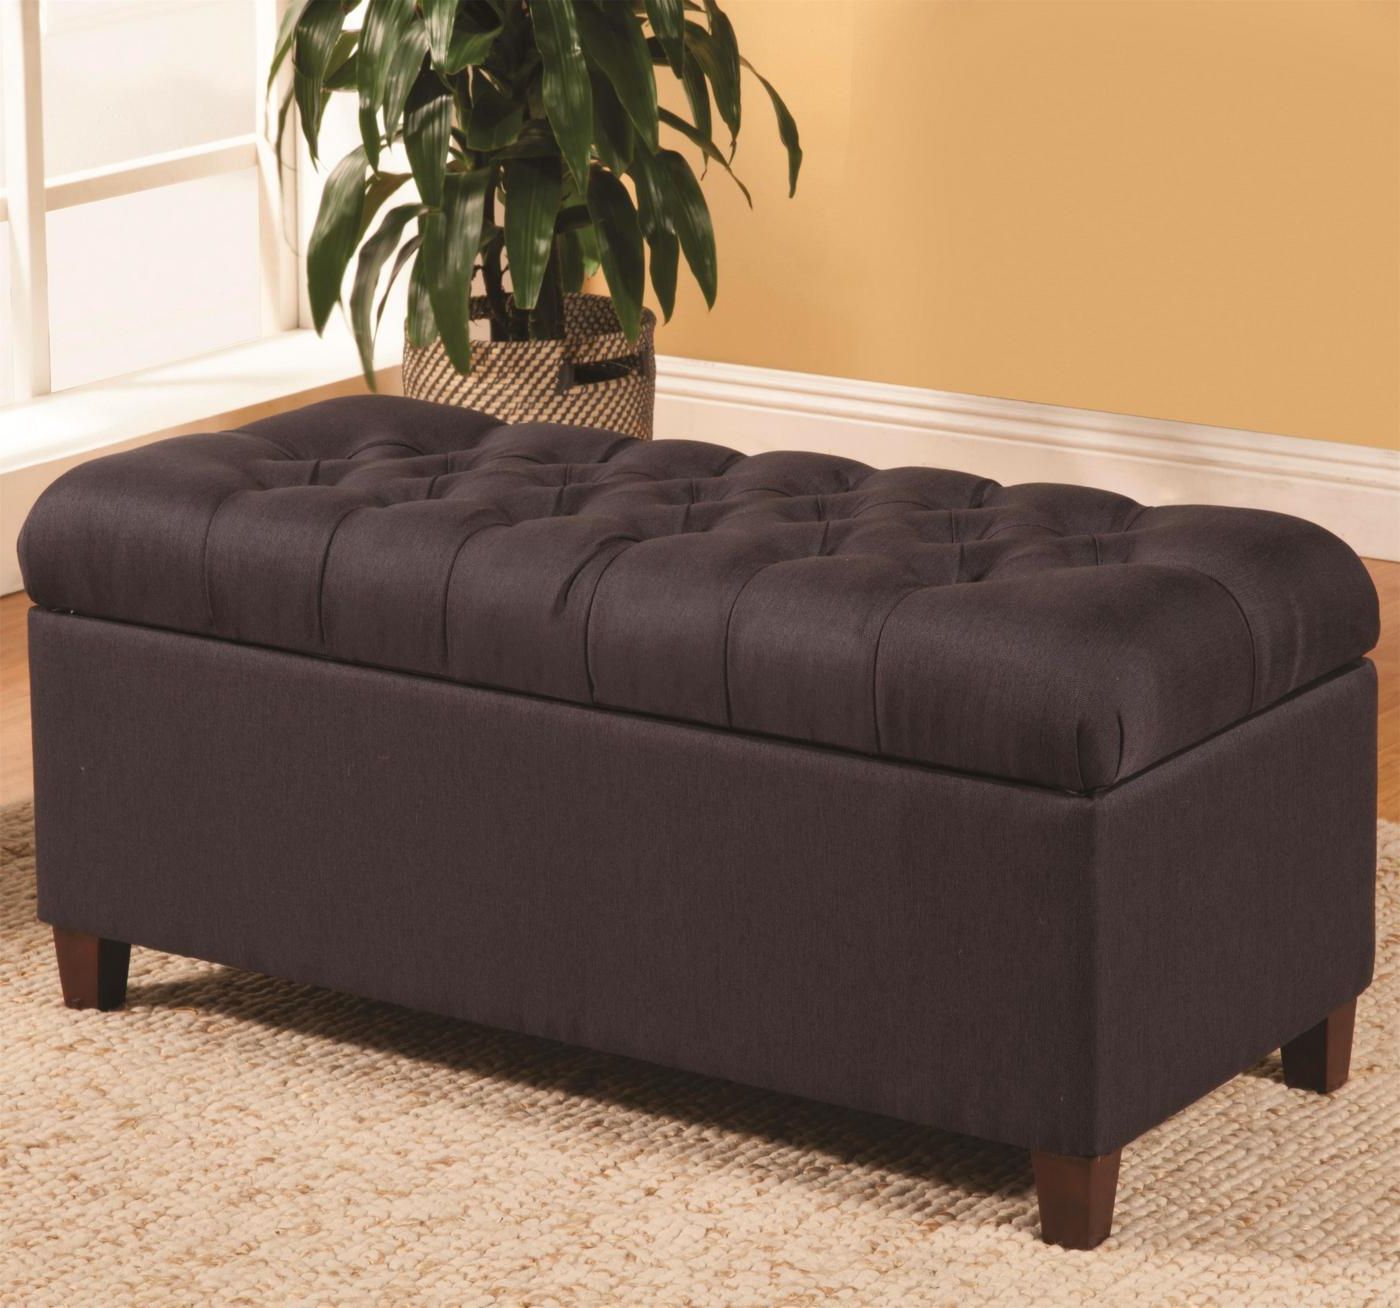 Charcoal Fabric Tufted Storage Ottomans Inside Latest Dark Brown Transitional Ottoman Tufted Storage Bench (View 4 of 10)